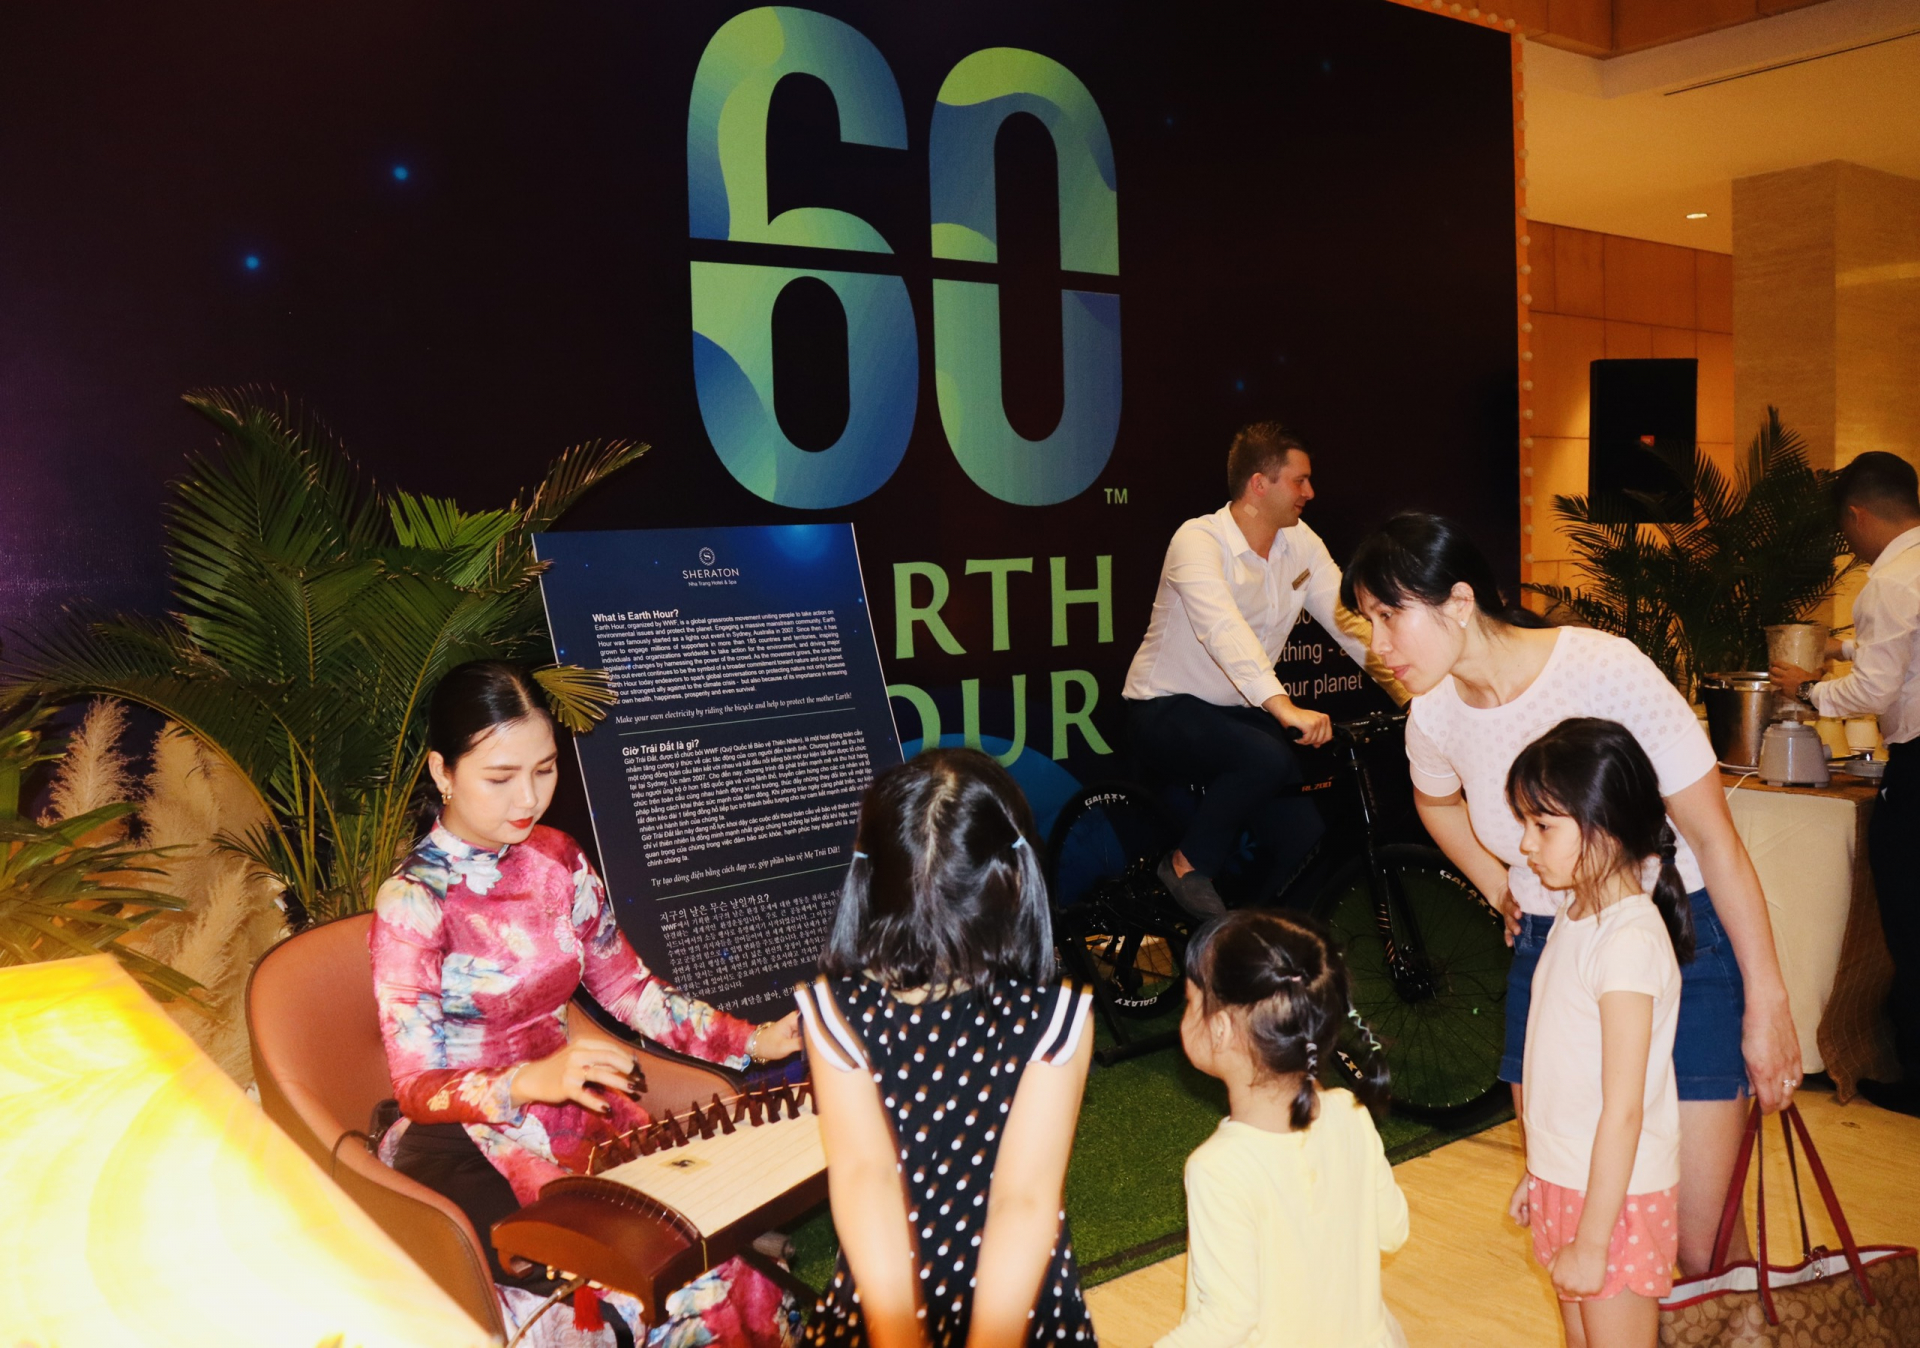 Sheraton Nha Trang Hotel organized a performance of traditional musical instruments to serve guests attending the Earth Hour event.